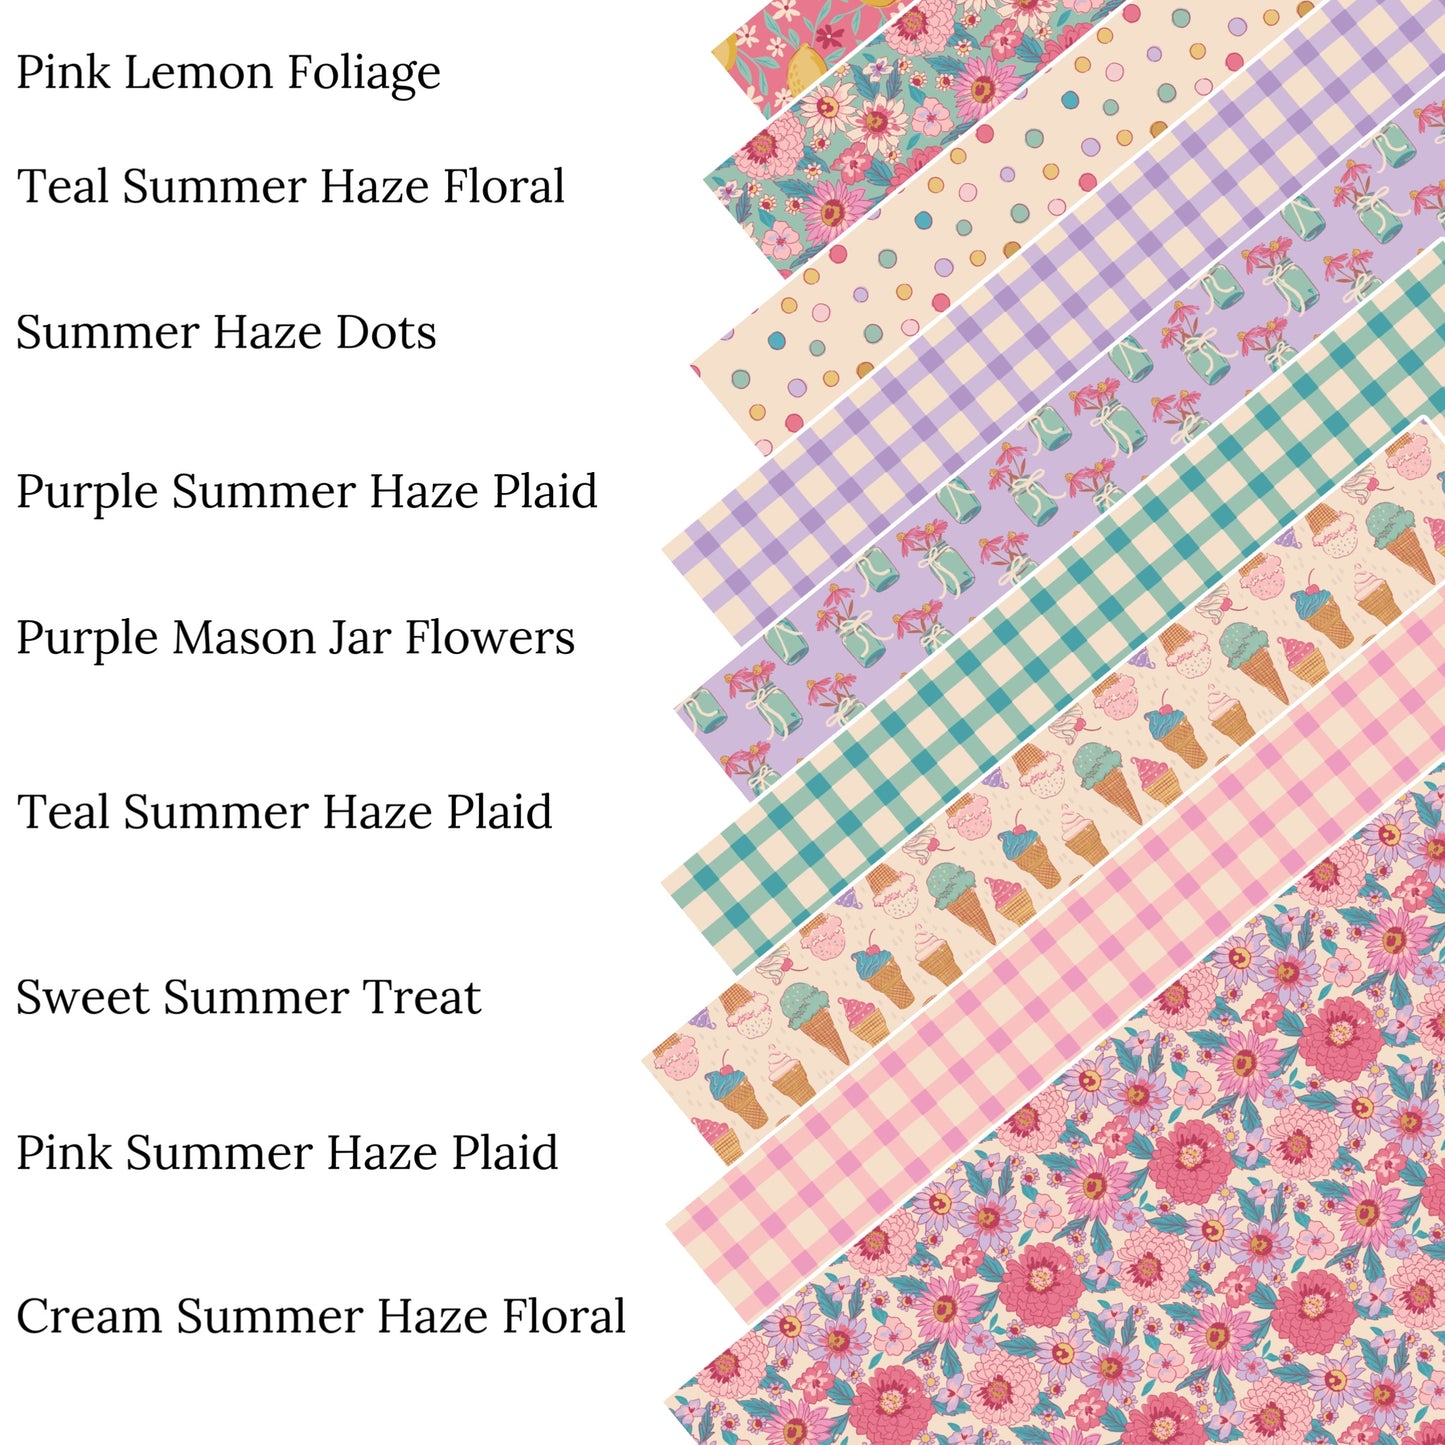 Sweet Summer Treat Faux Leather Sheets